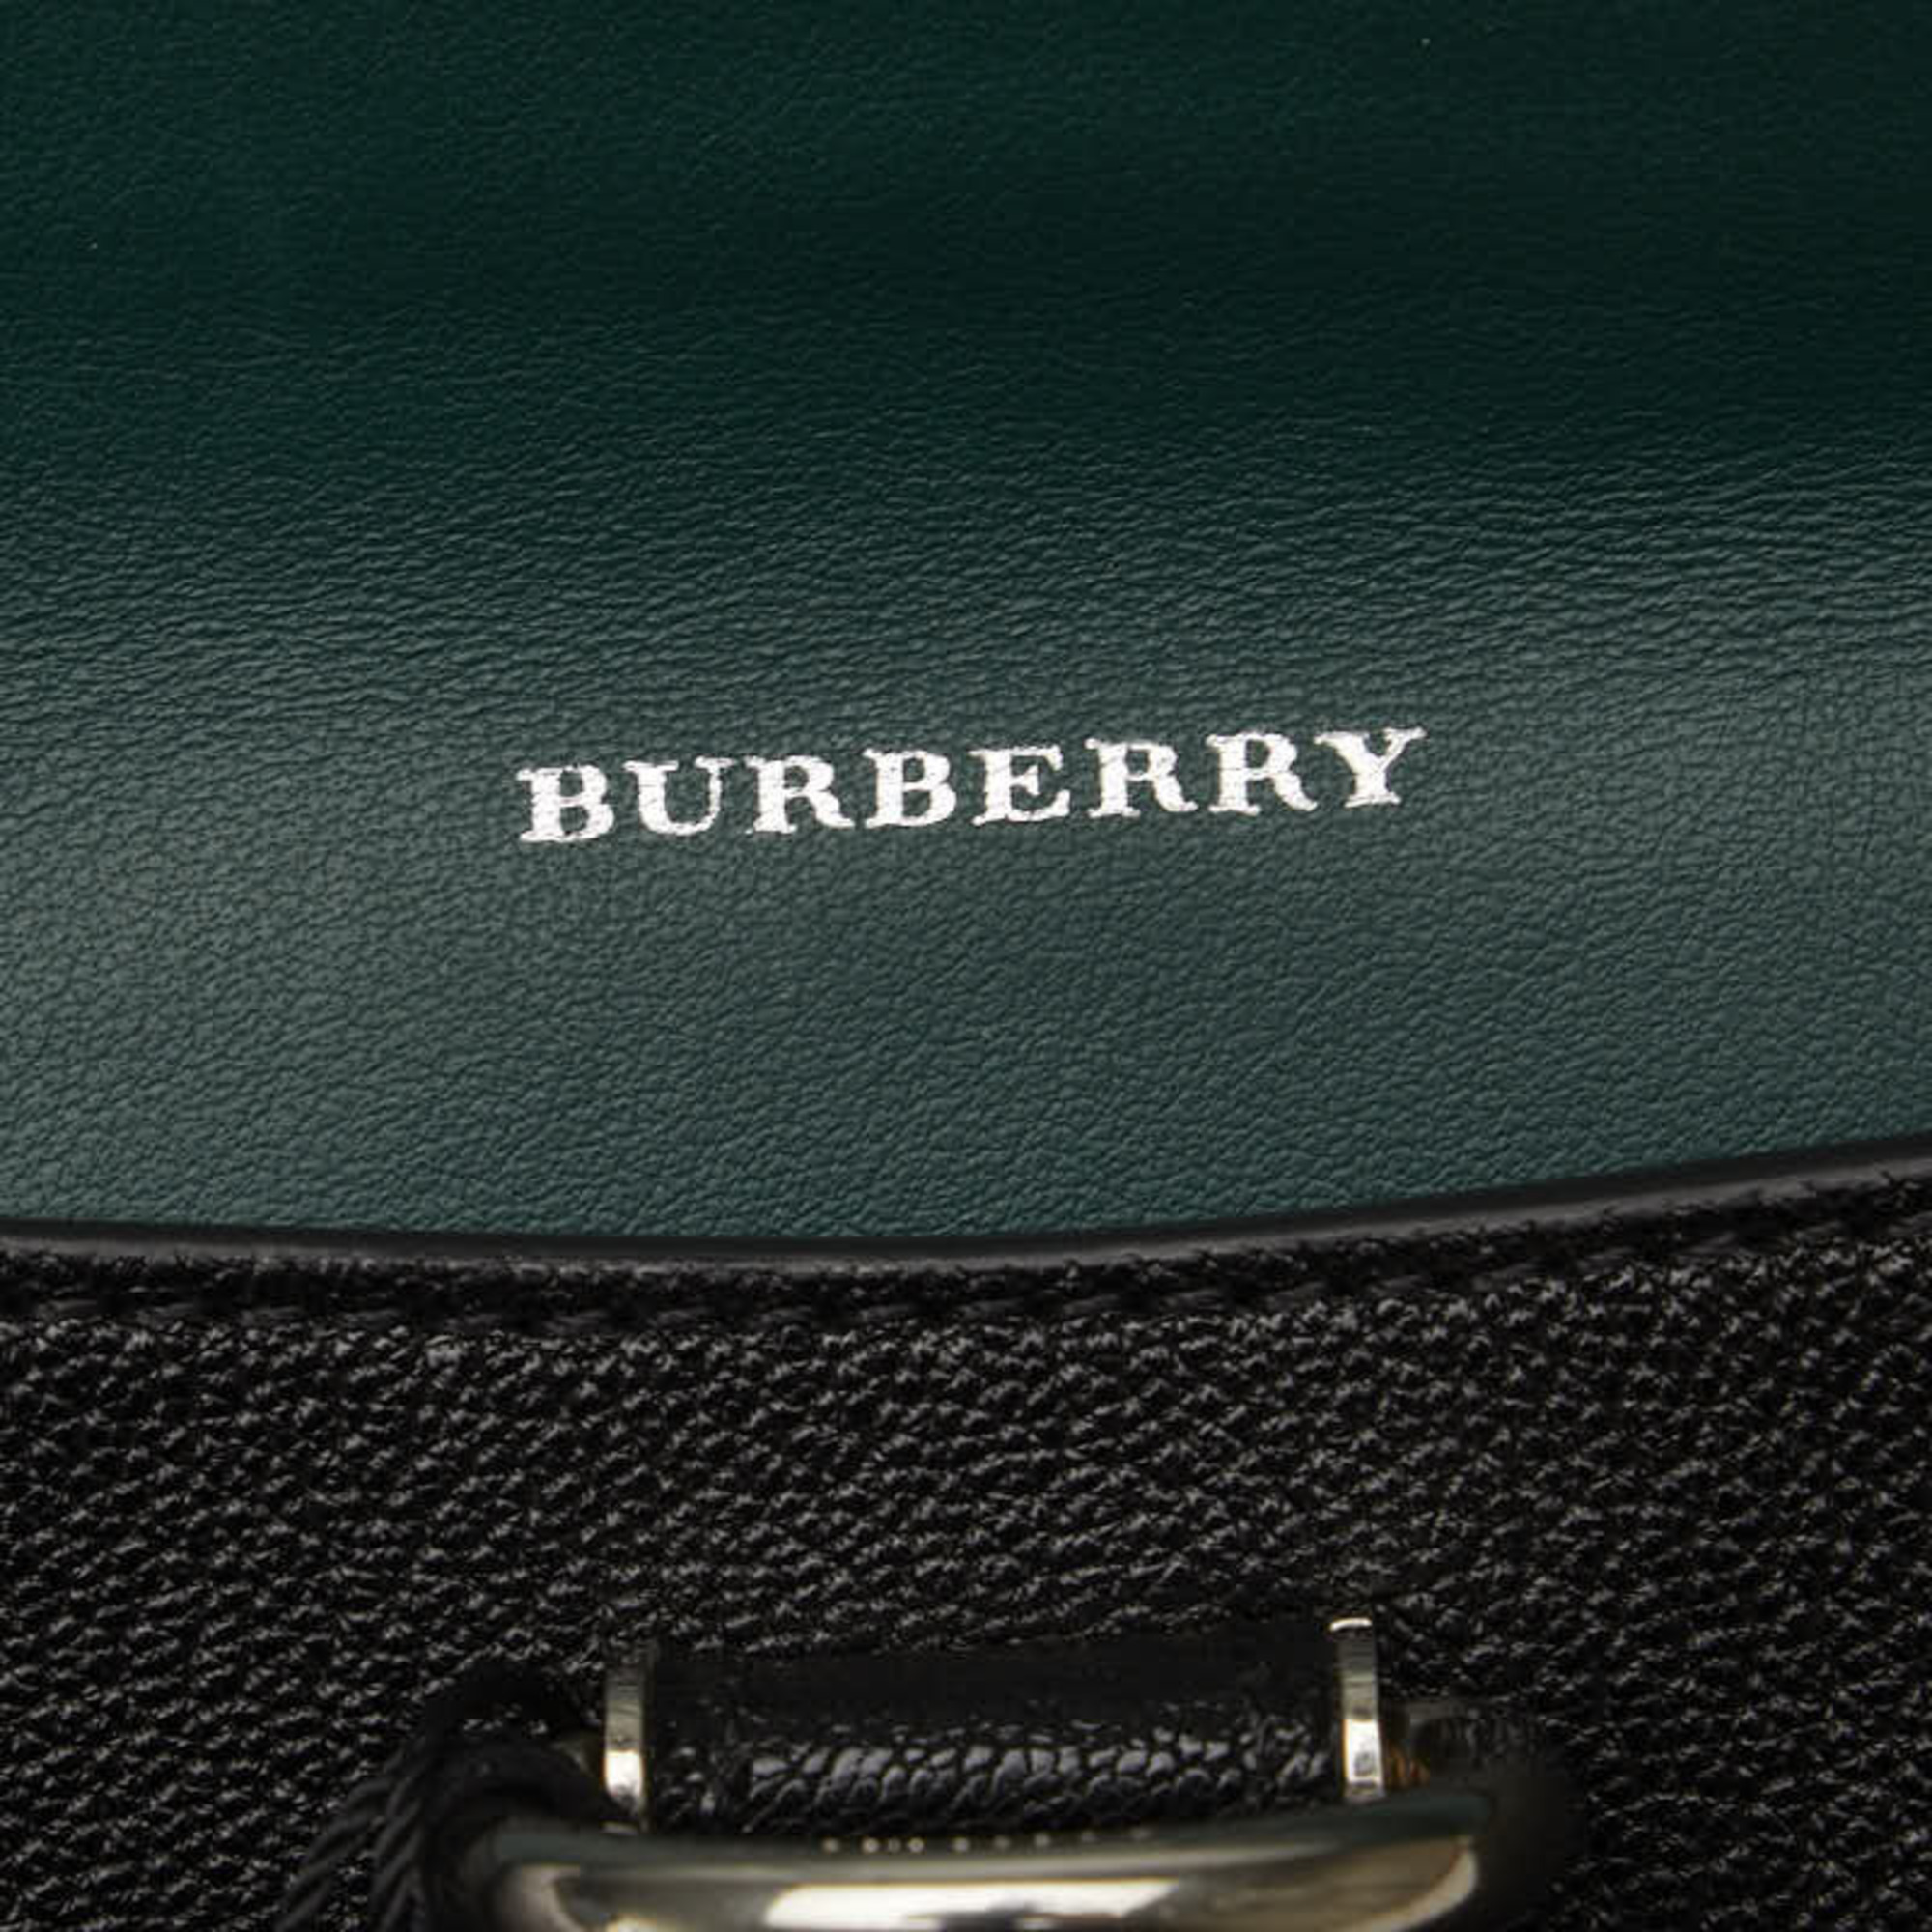 Burberry clutch bag second black leather ladies BURBERRY